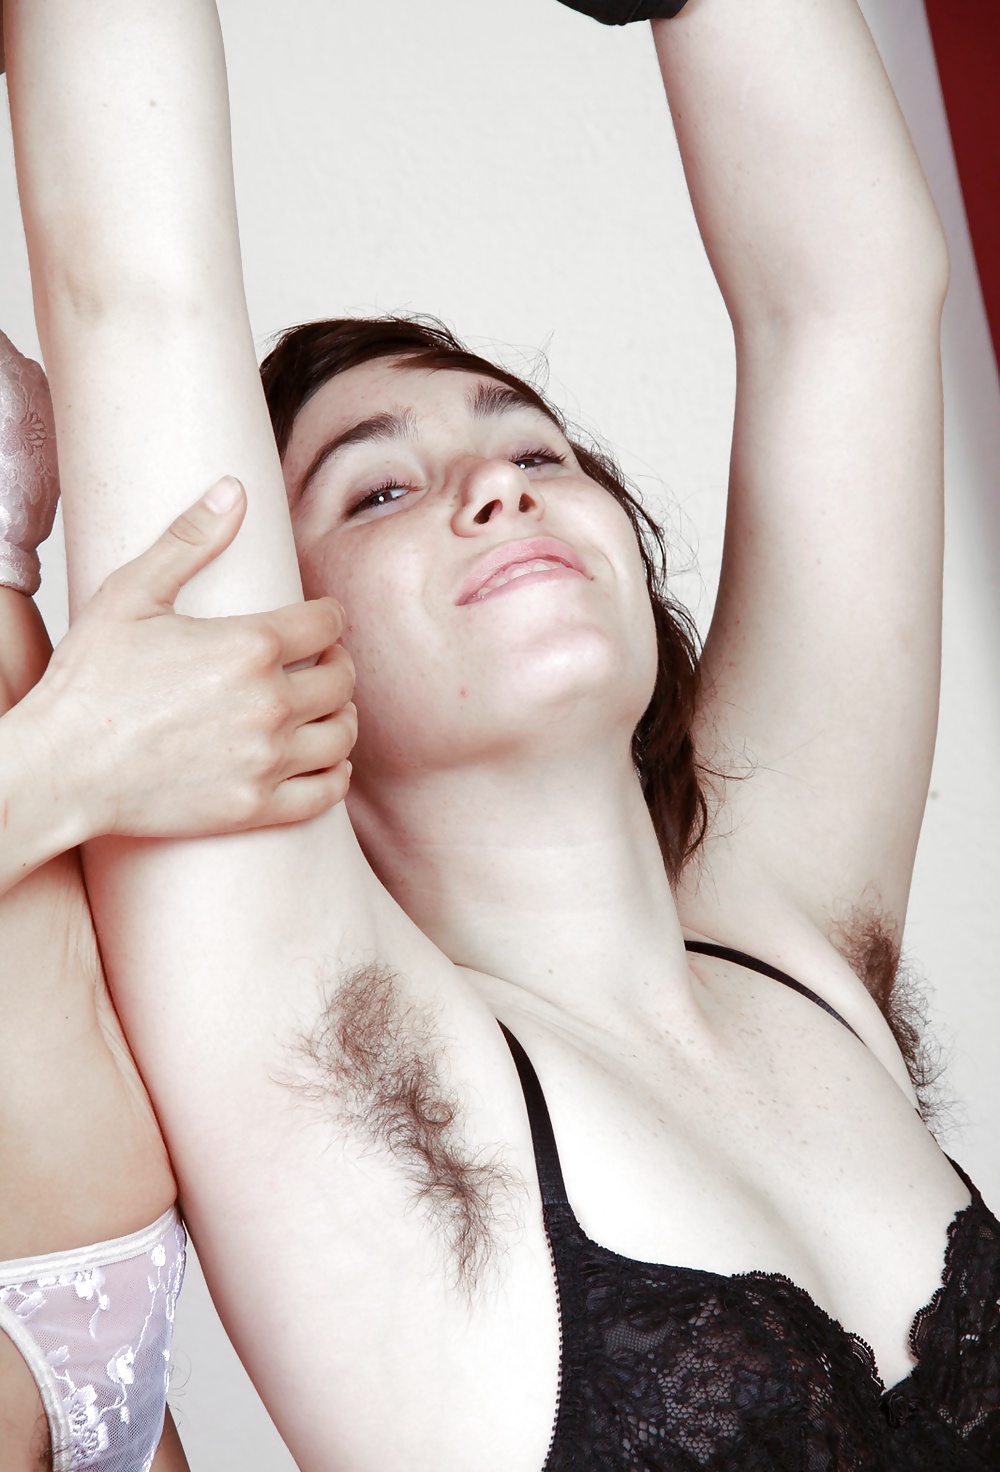 Hairy armpit women together 2 #30500700